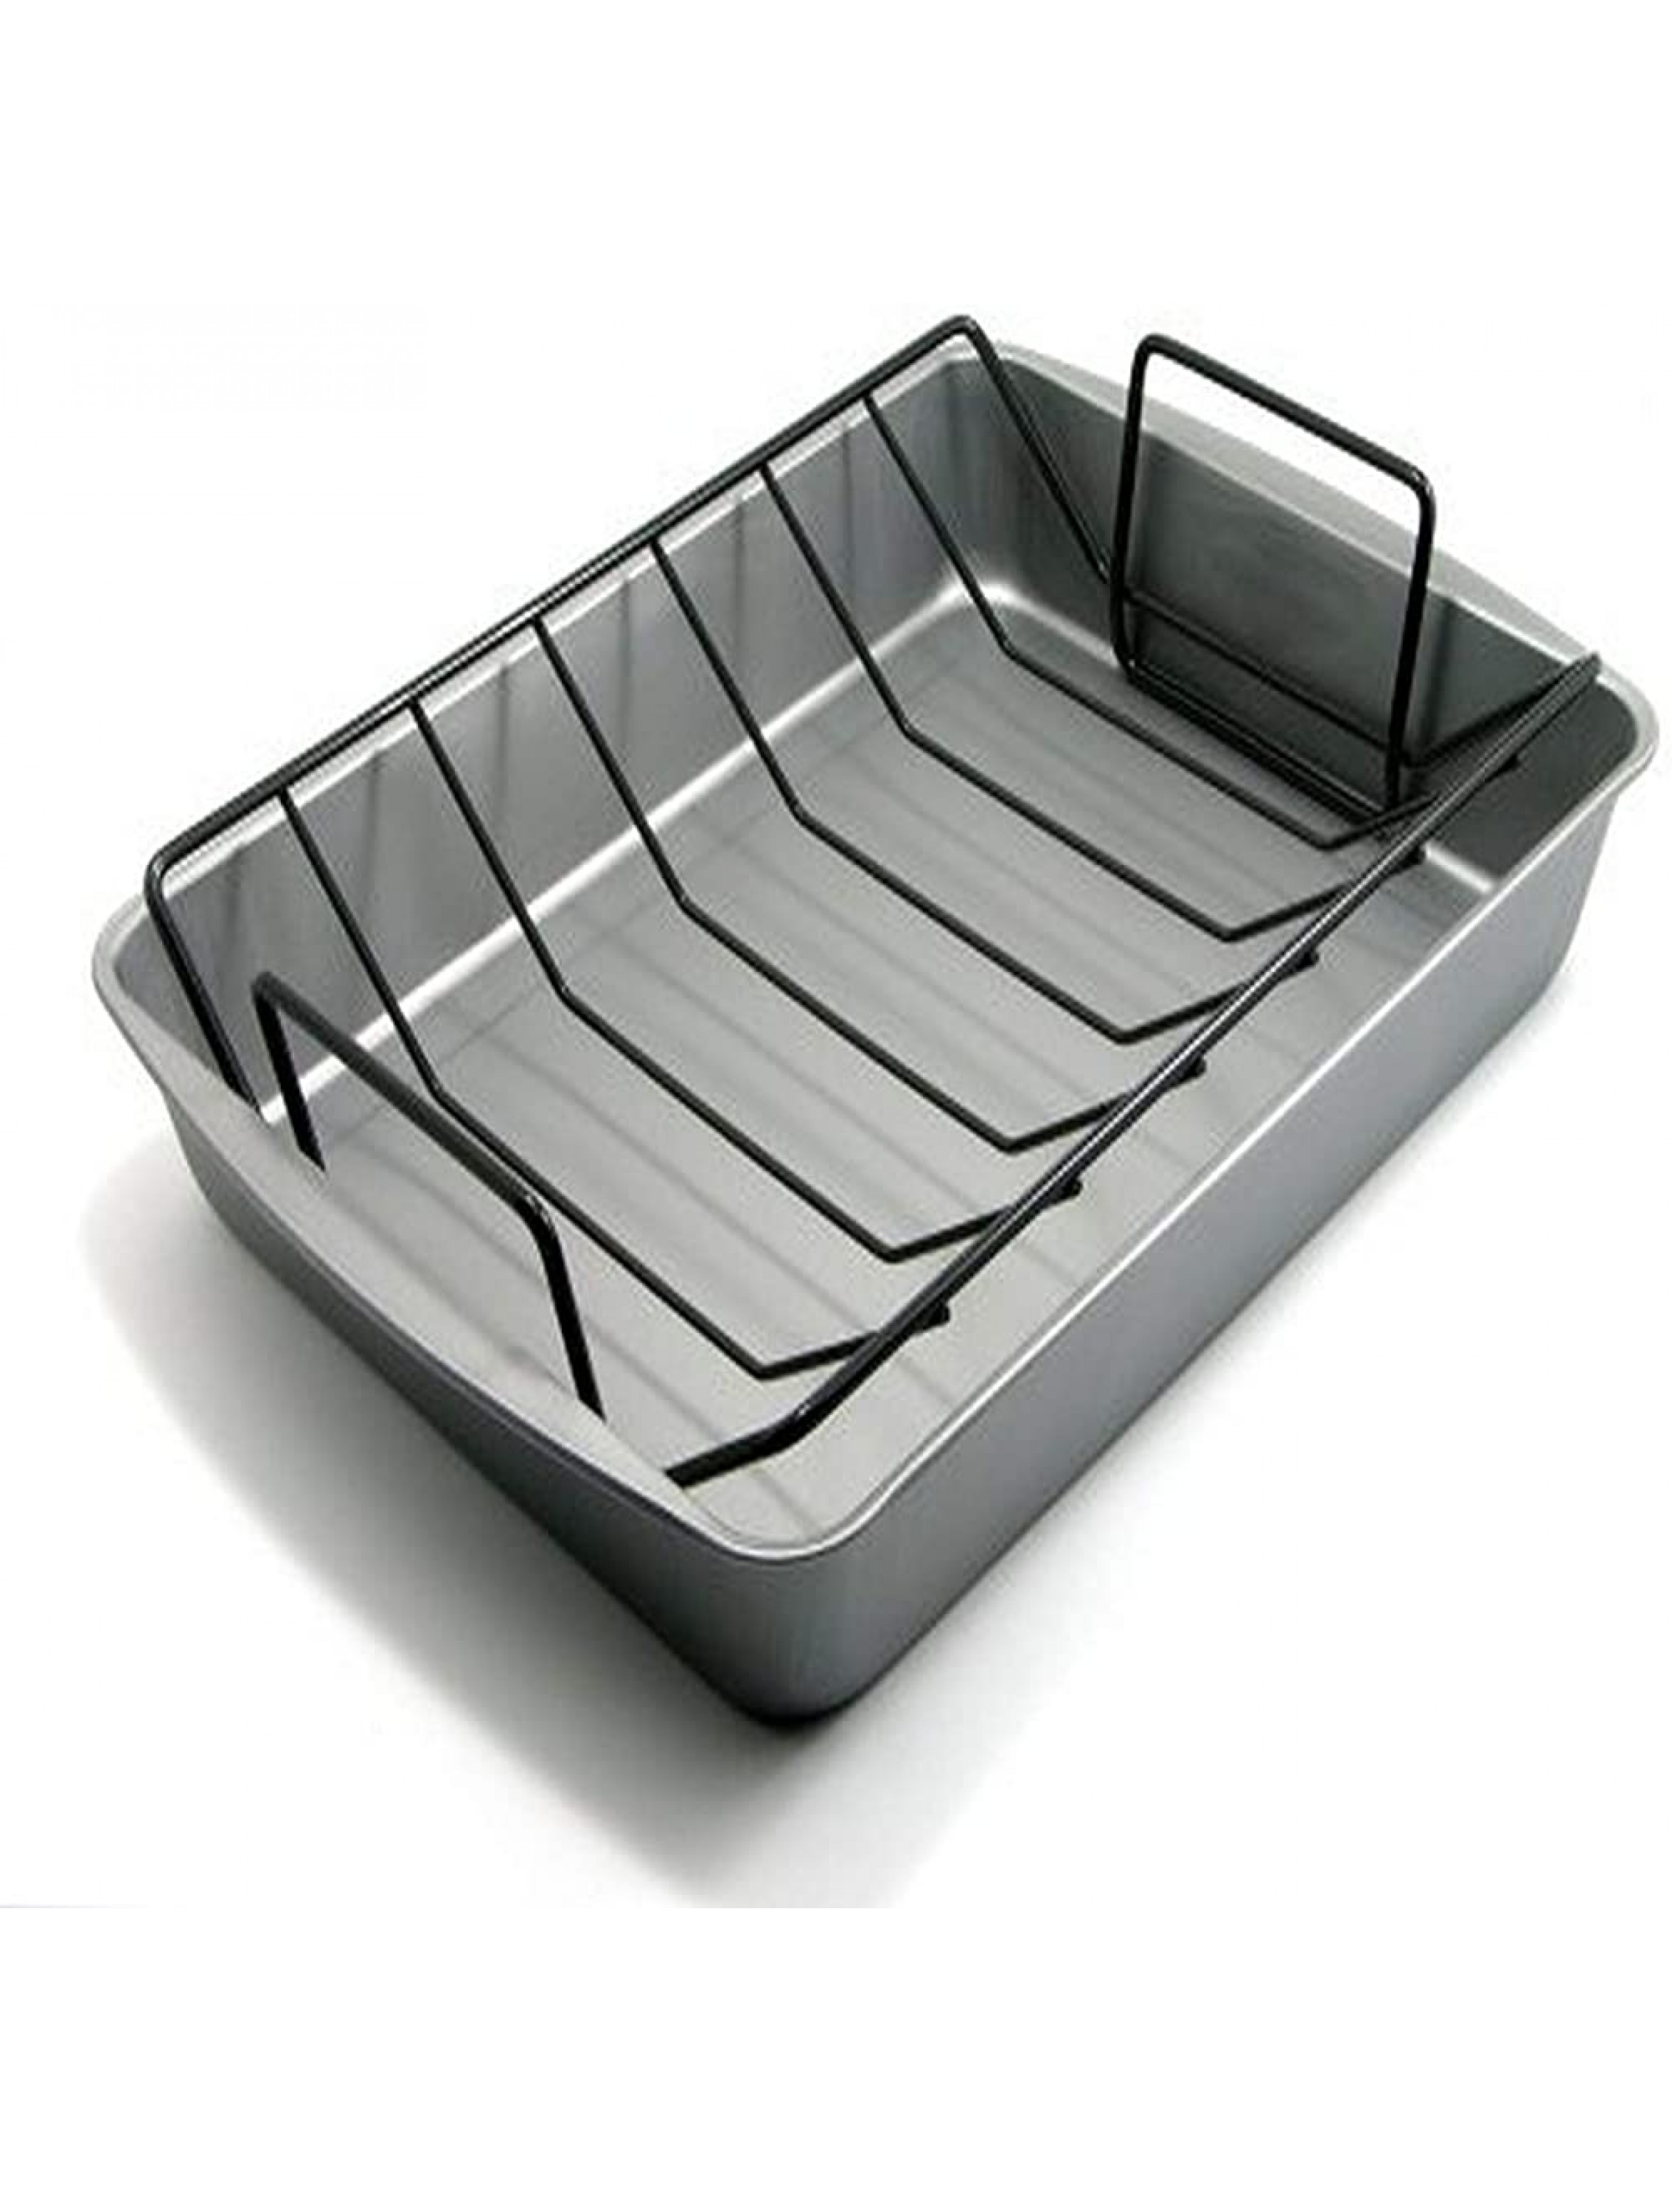 G & S Metal Products Company OvenStuff Nonstick Roasting Pan with Rack Large Gray - BU6TA97HL